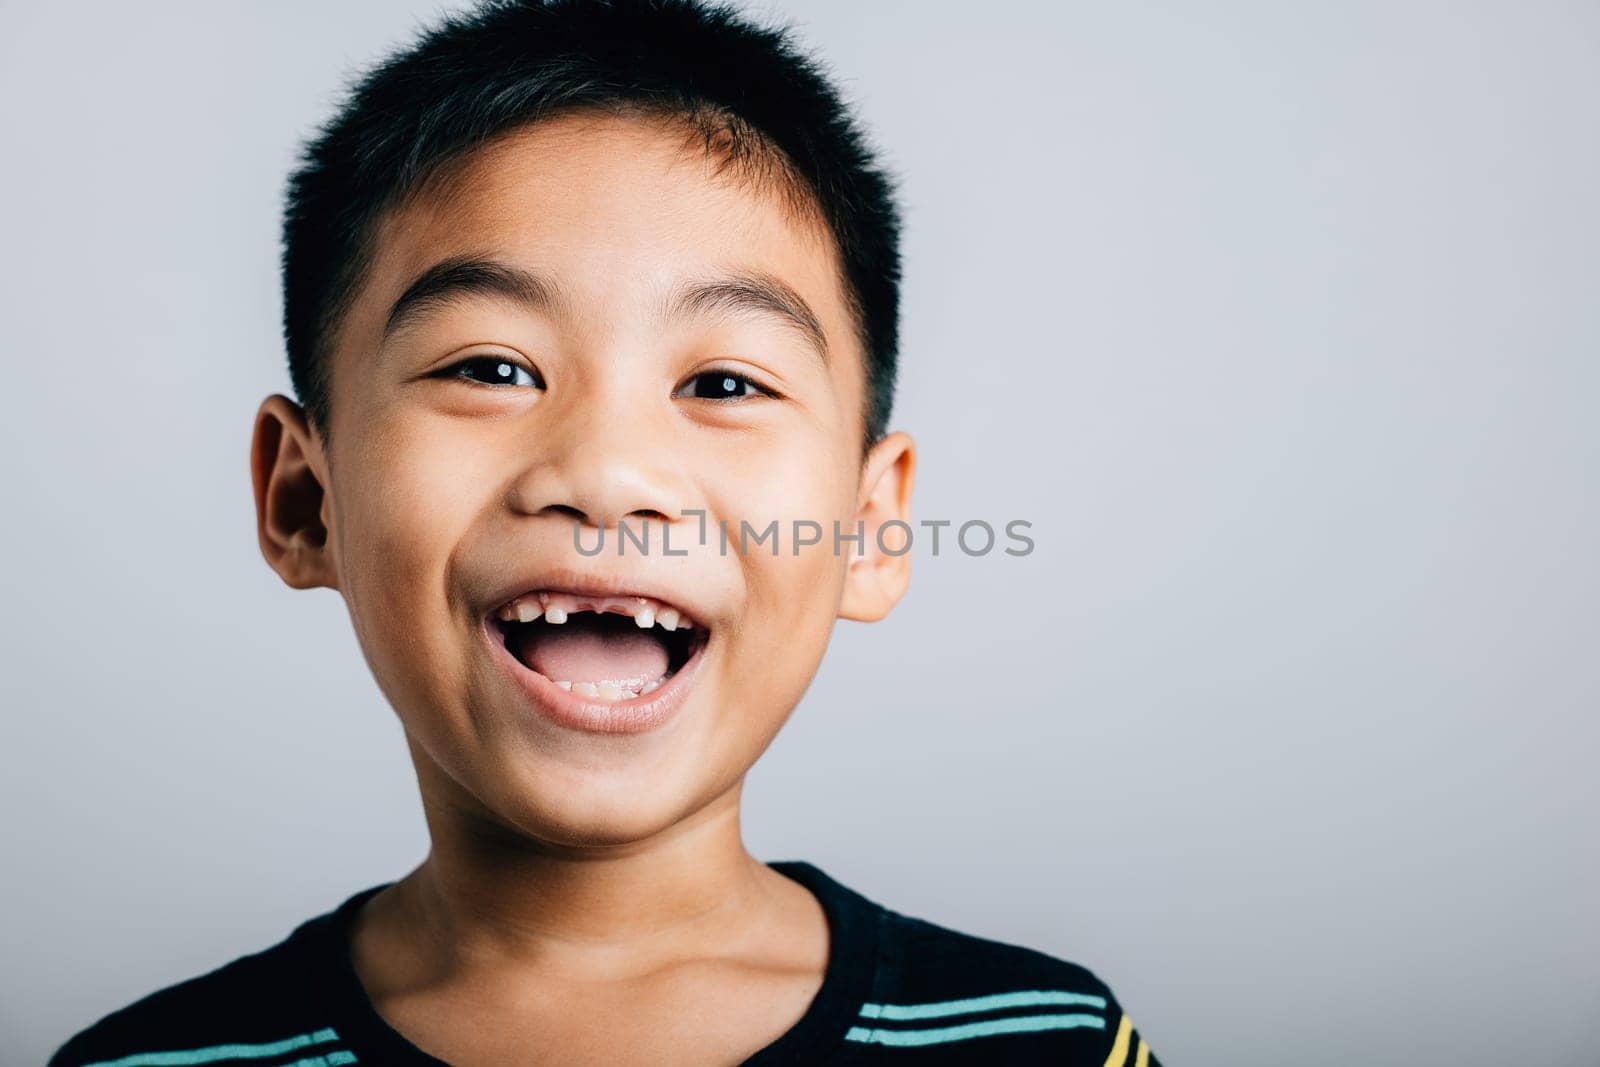 Smiling toddler with lost upper tooth dental gap shown. Child isolated portrait on white. Dental care joyful growth tooth fairy moment. Give me that happy Children show teeth new gap, dentist problems